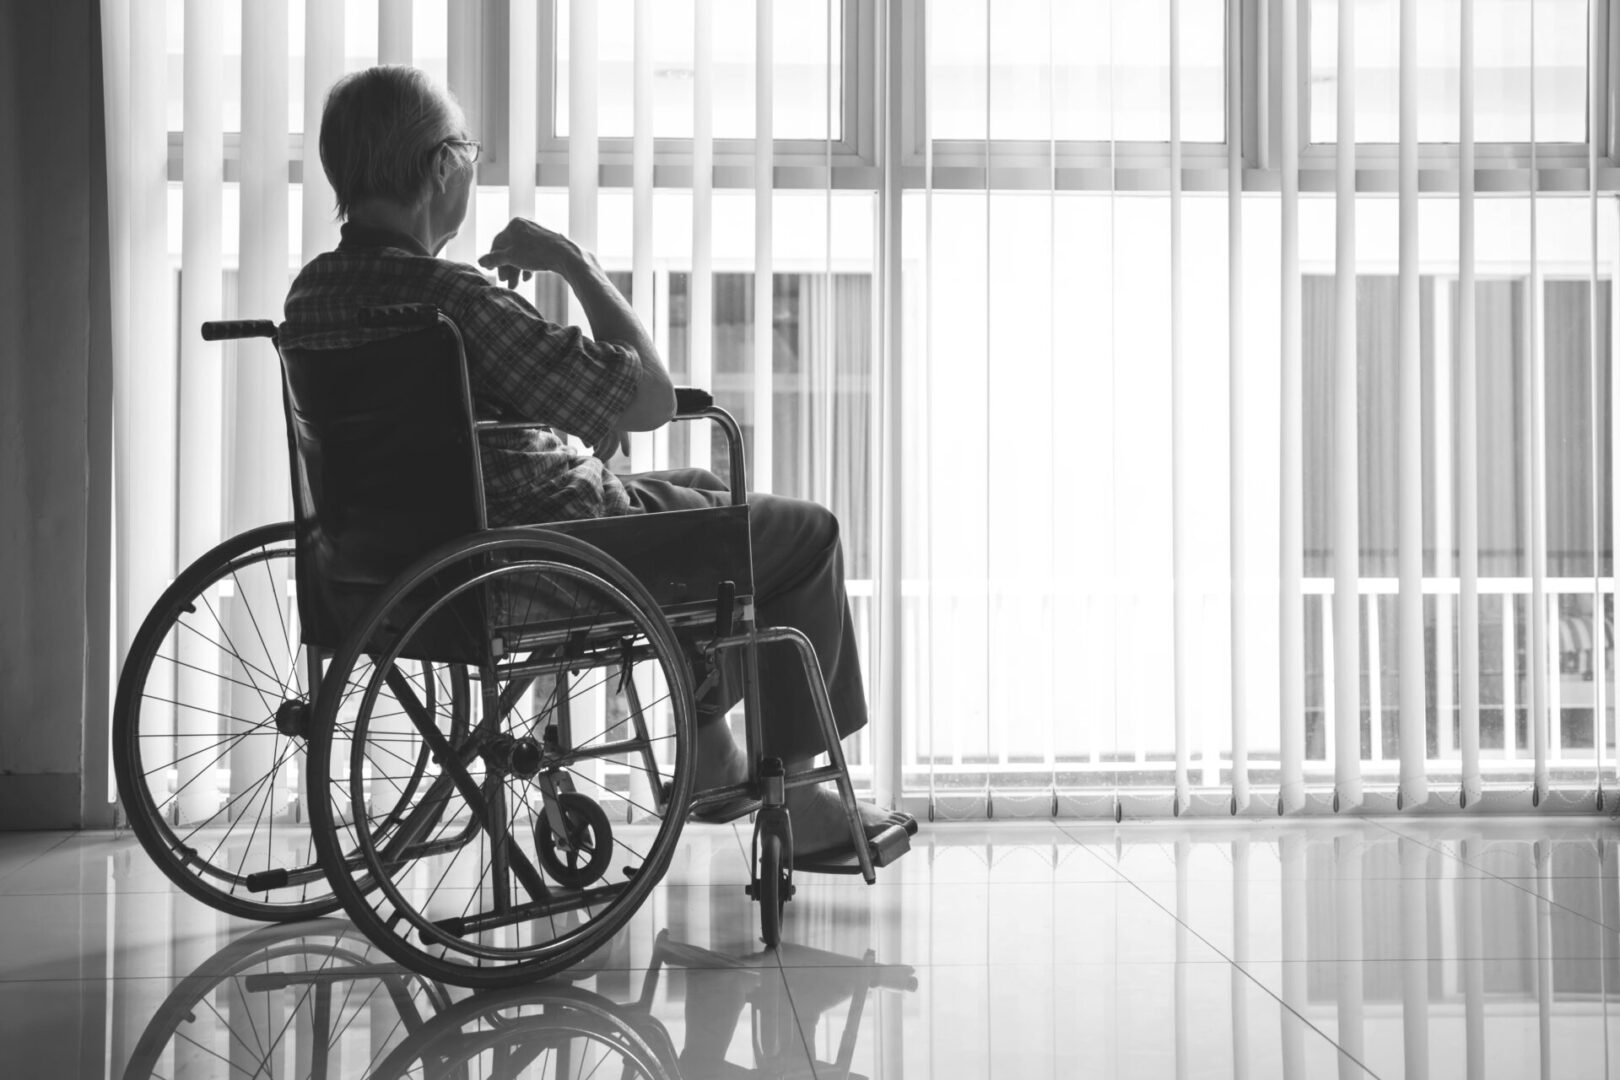 Back view of elderly man looks pensive while sitting in the wheelchair by the window. Shot in the retirement home